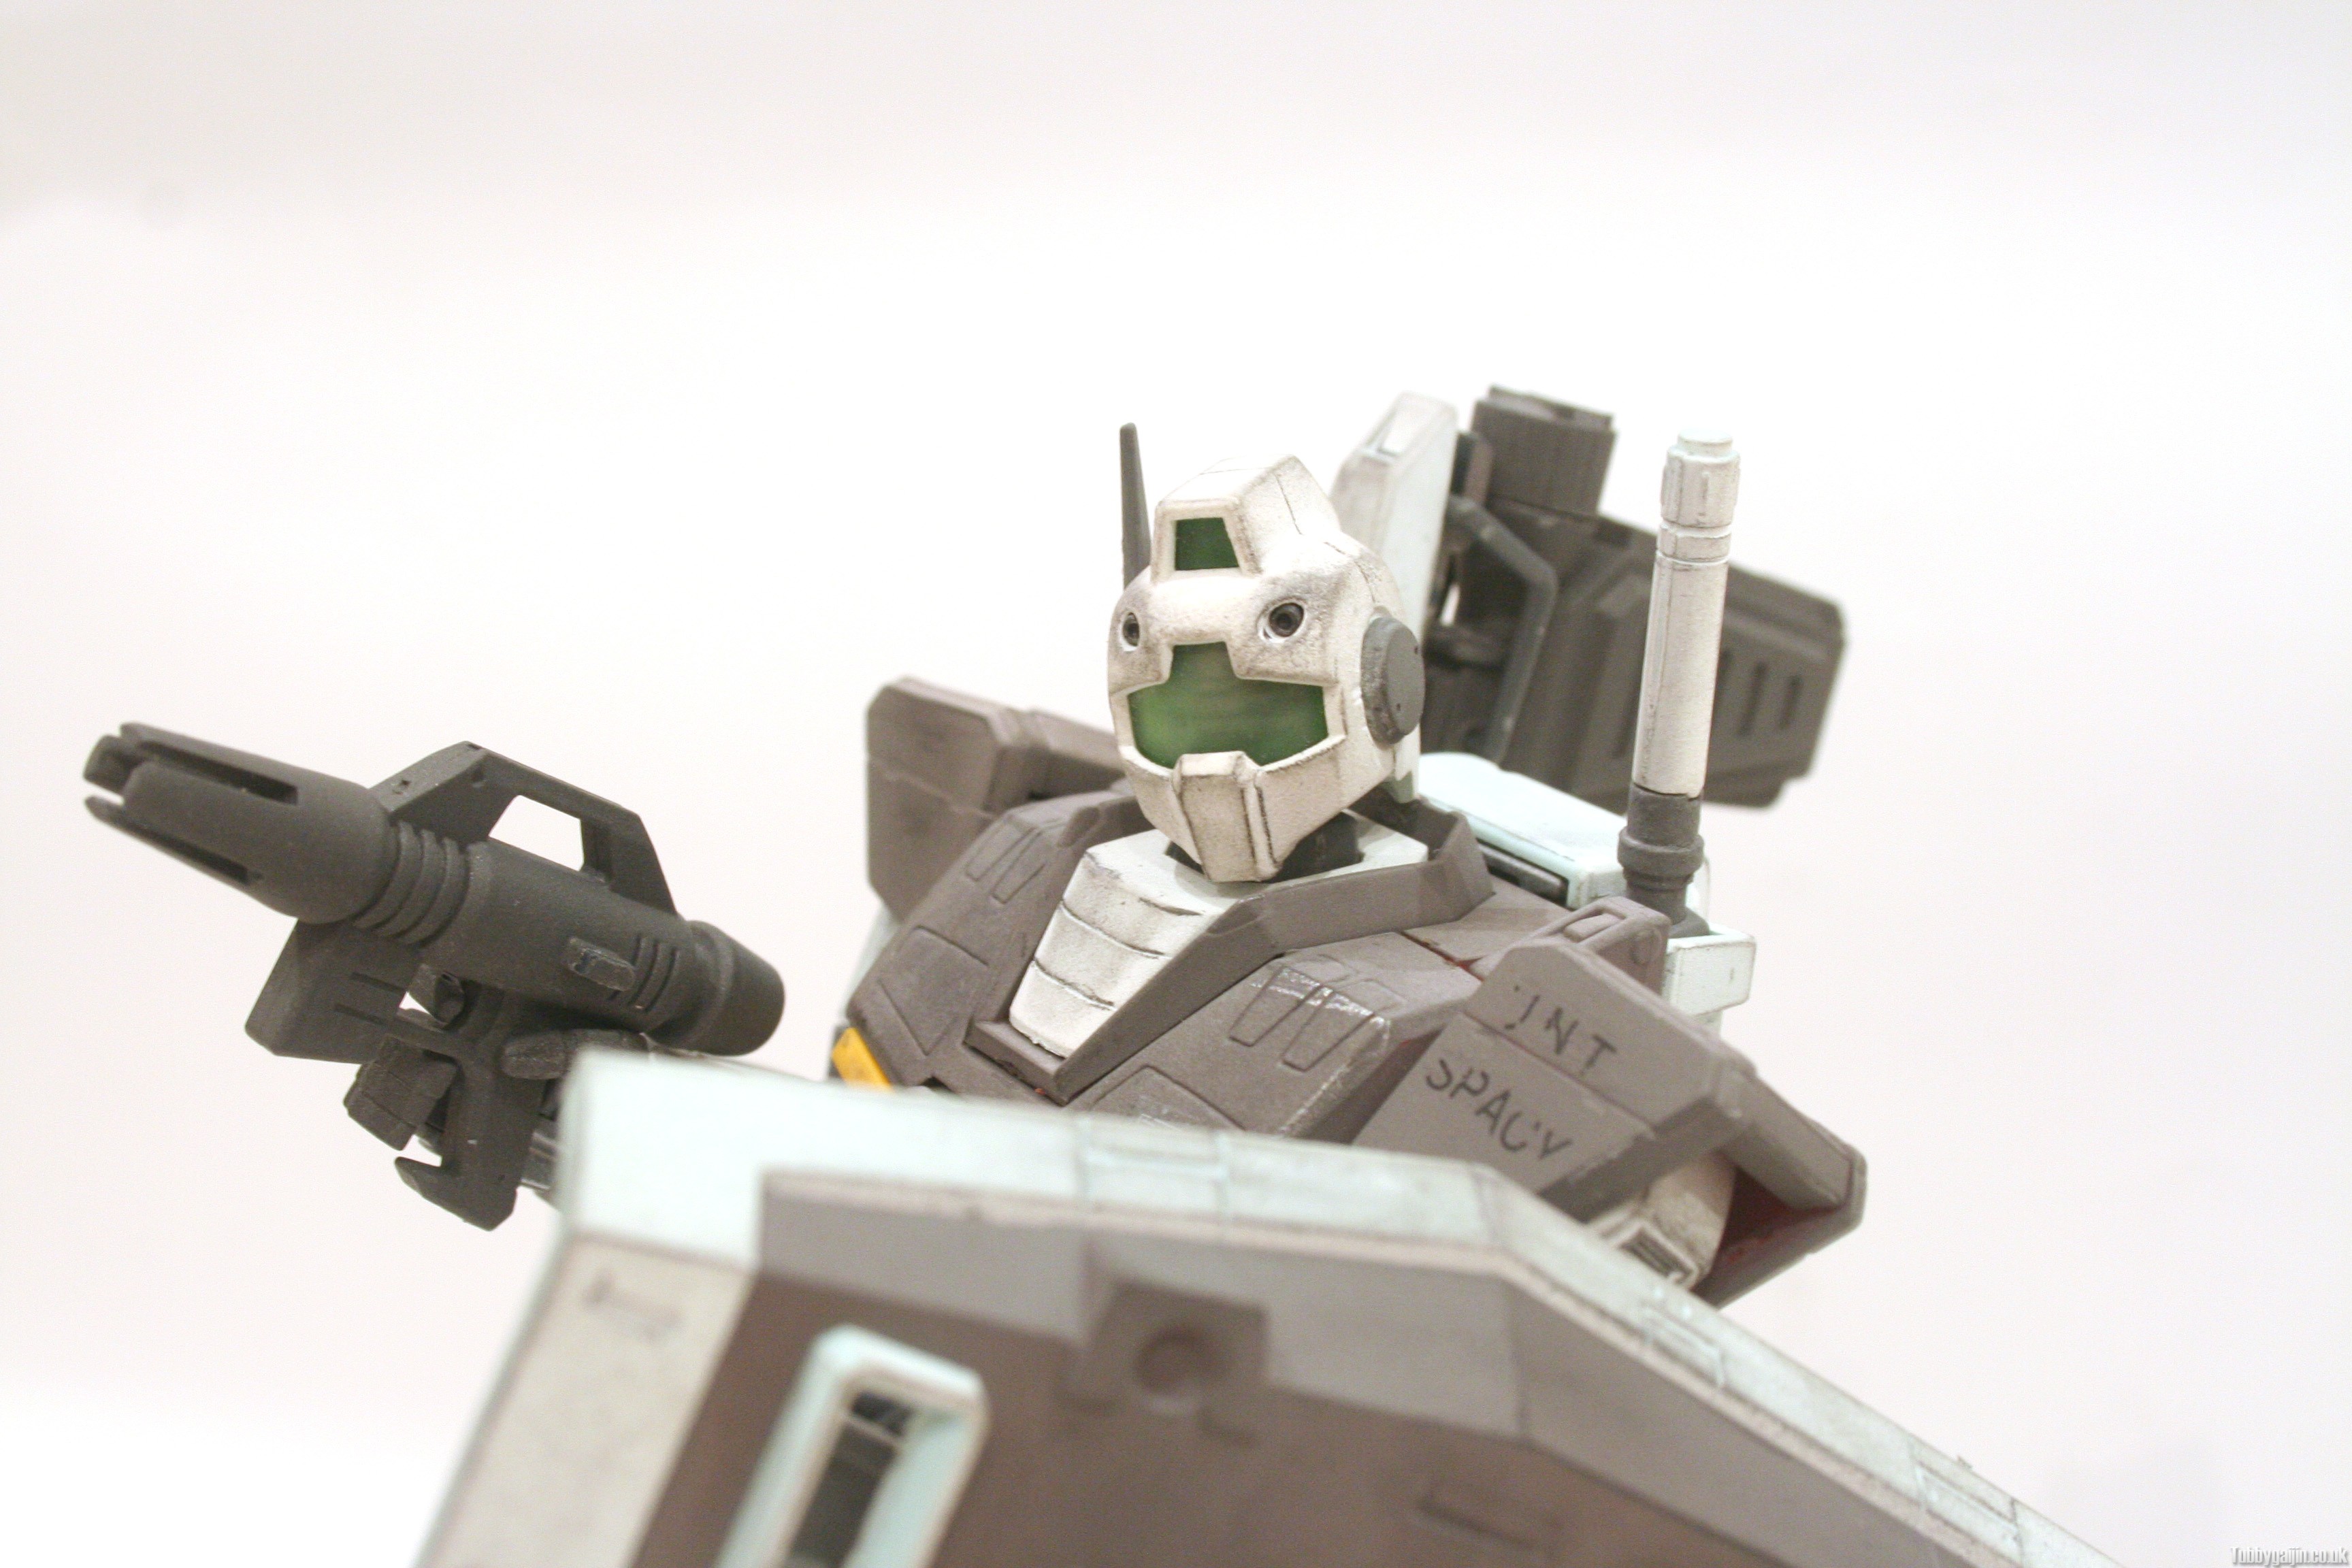 MG RGM-79 GM Ver Rollout - Review